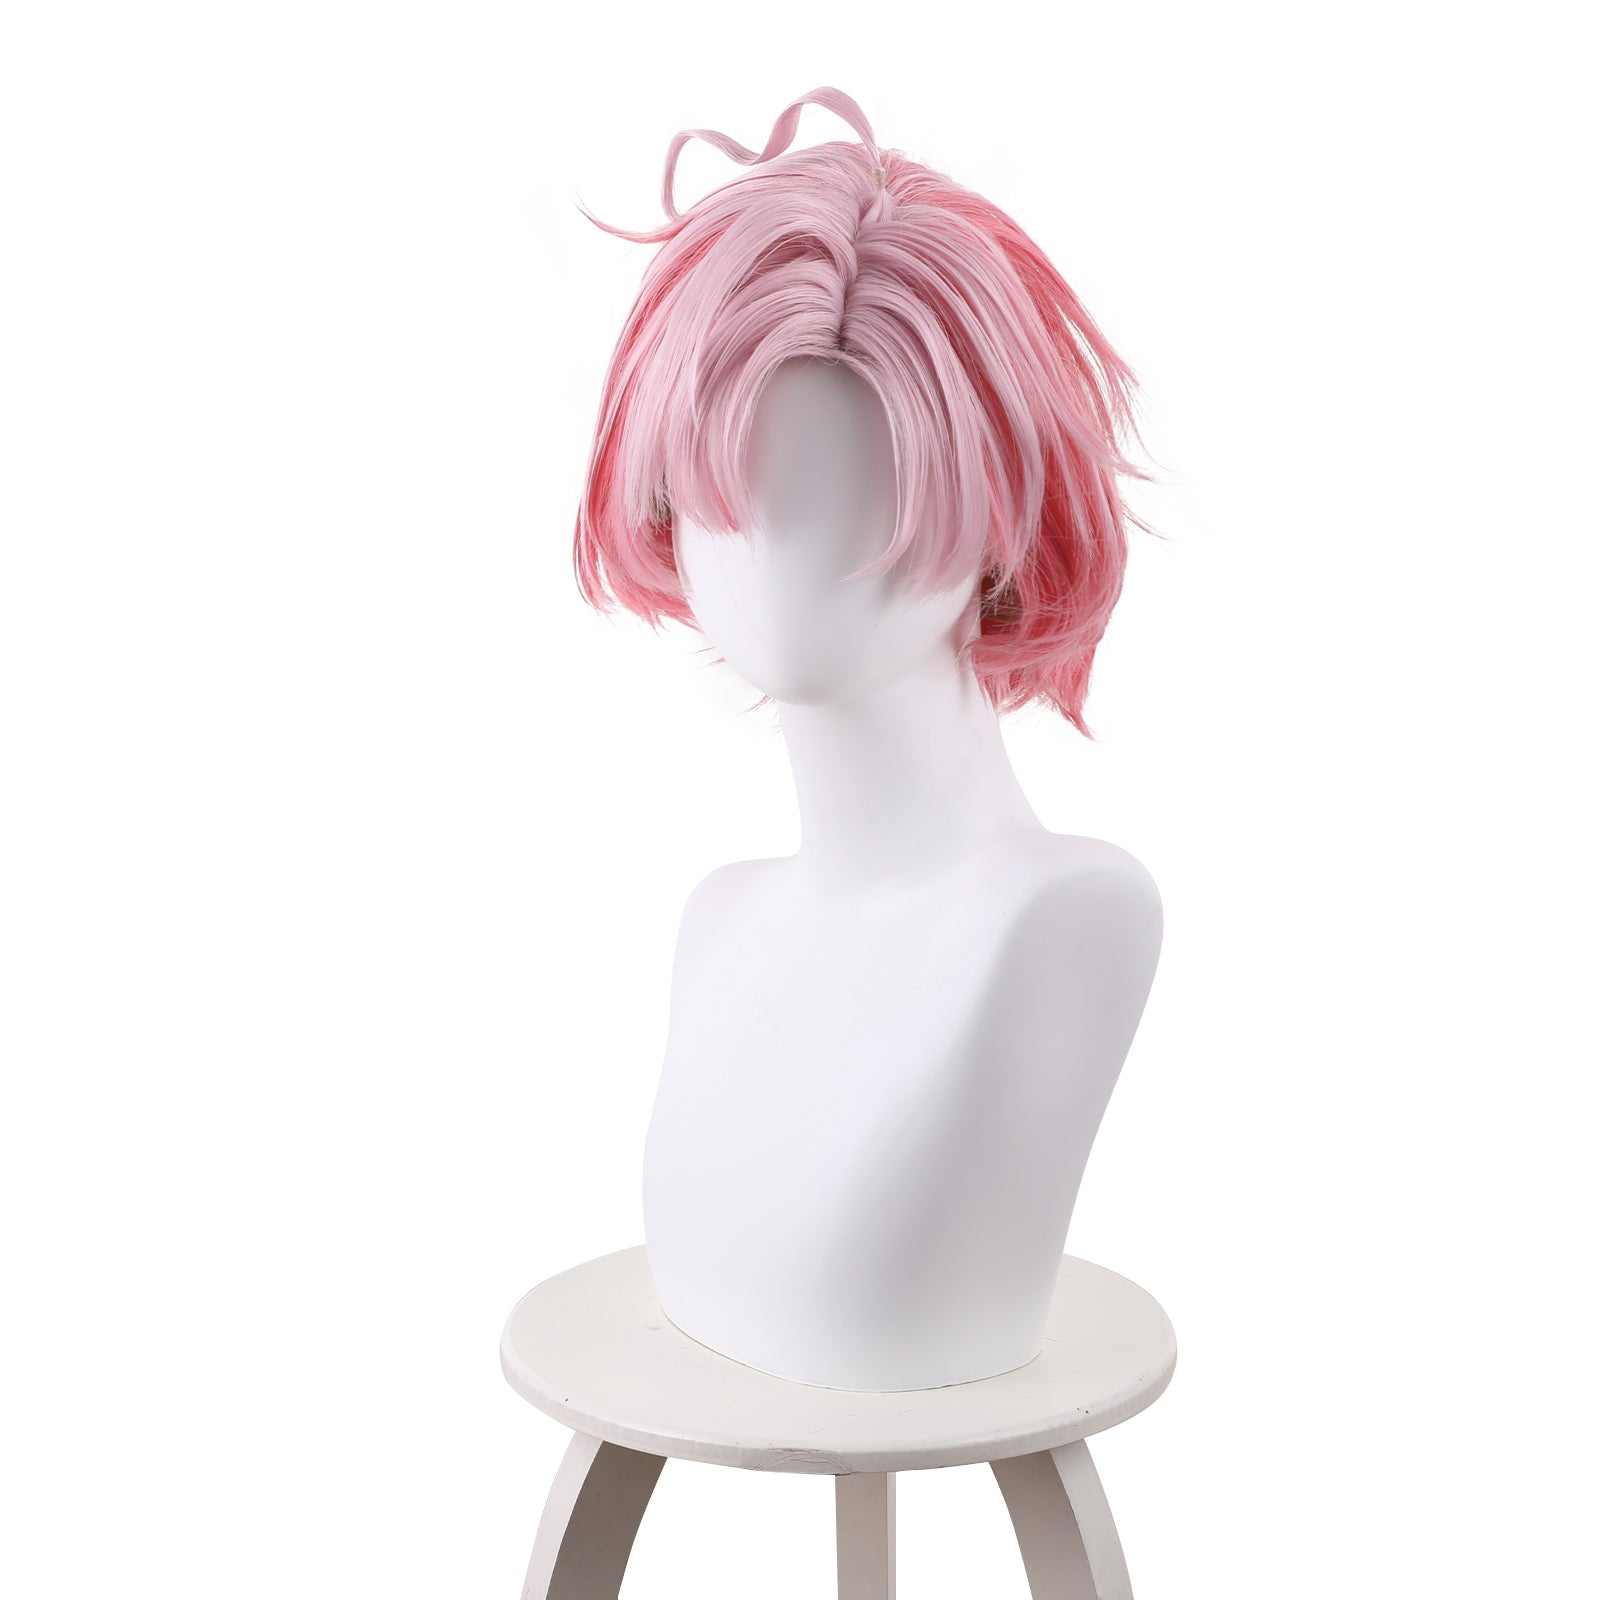 Rulercosplay Anime Fragaria Memories Melode Pink with White Short Cosplay Wig